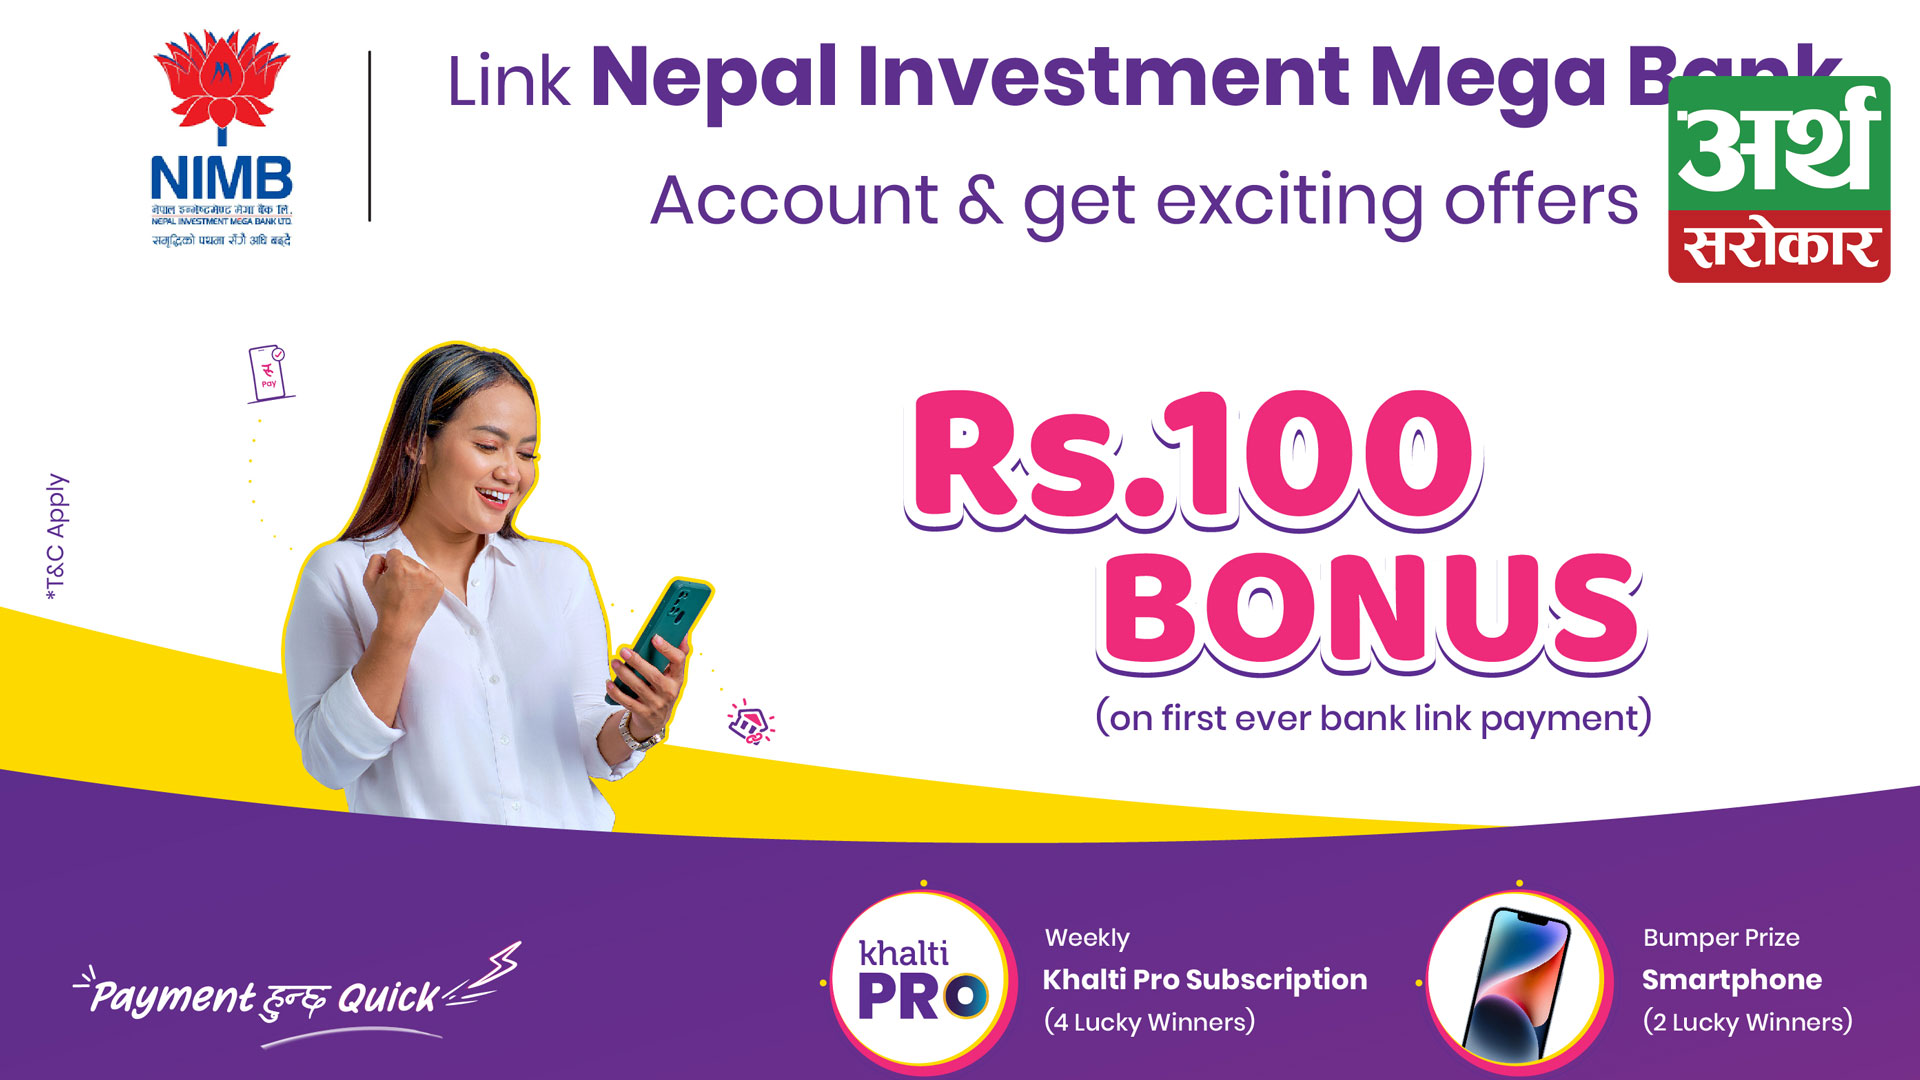 Link NIMB account to Khalti and win Smartphone, Khalti Pro, and Rs.100 bonus on a Bank Link Payment